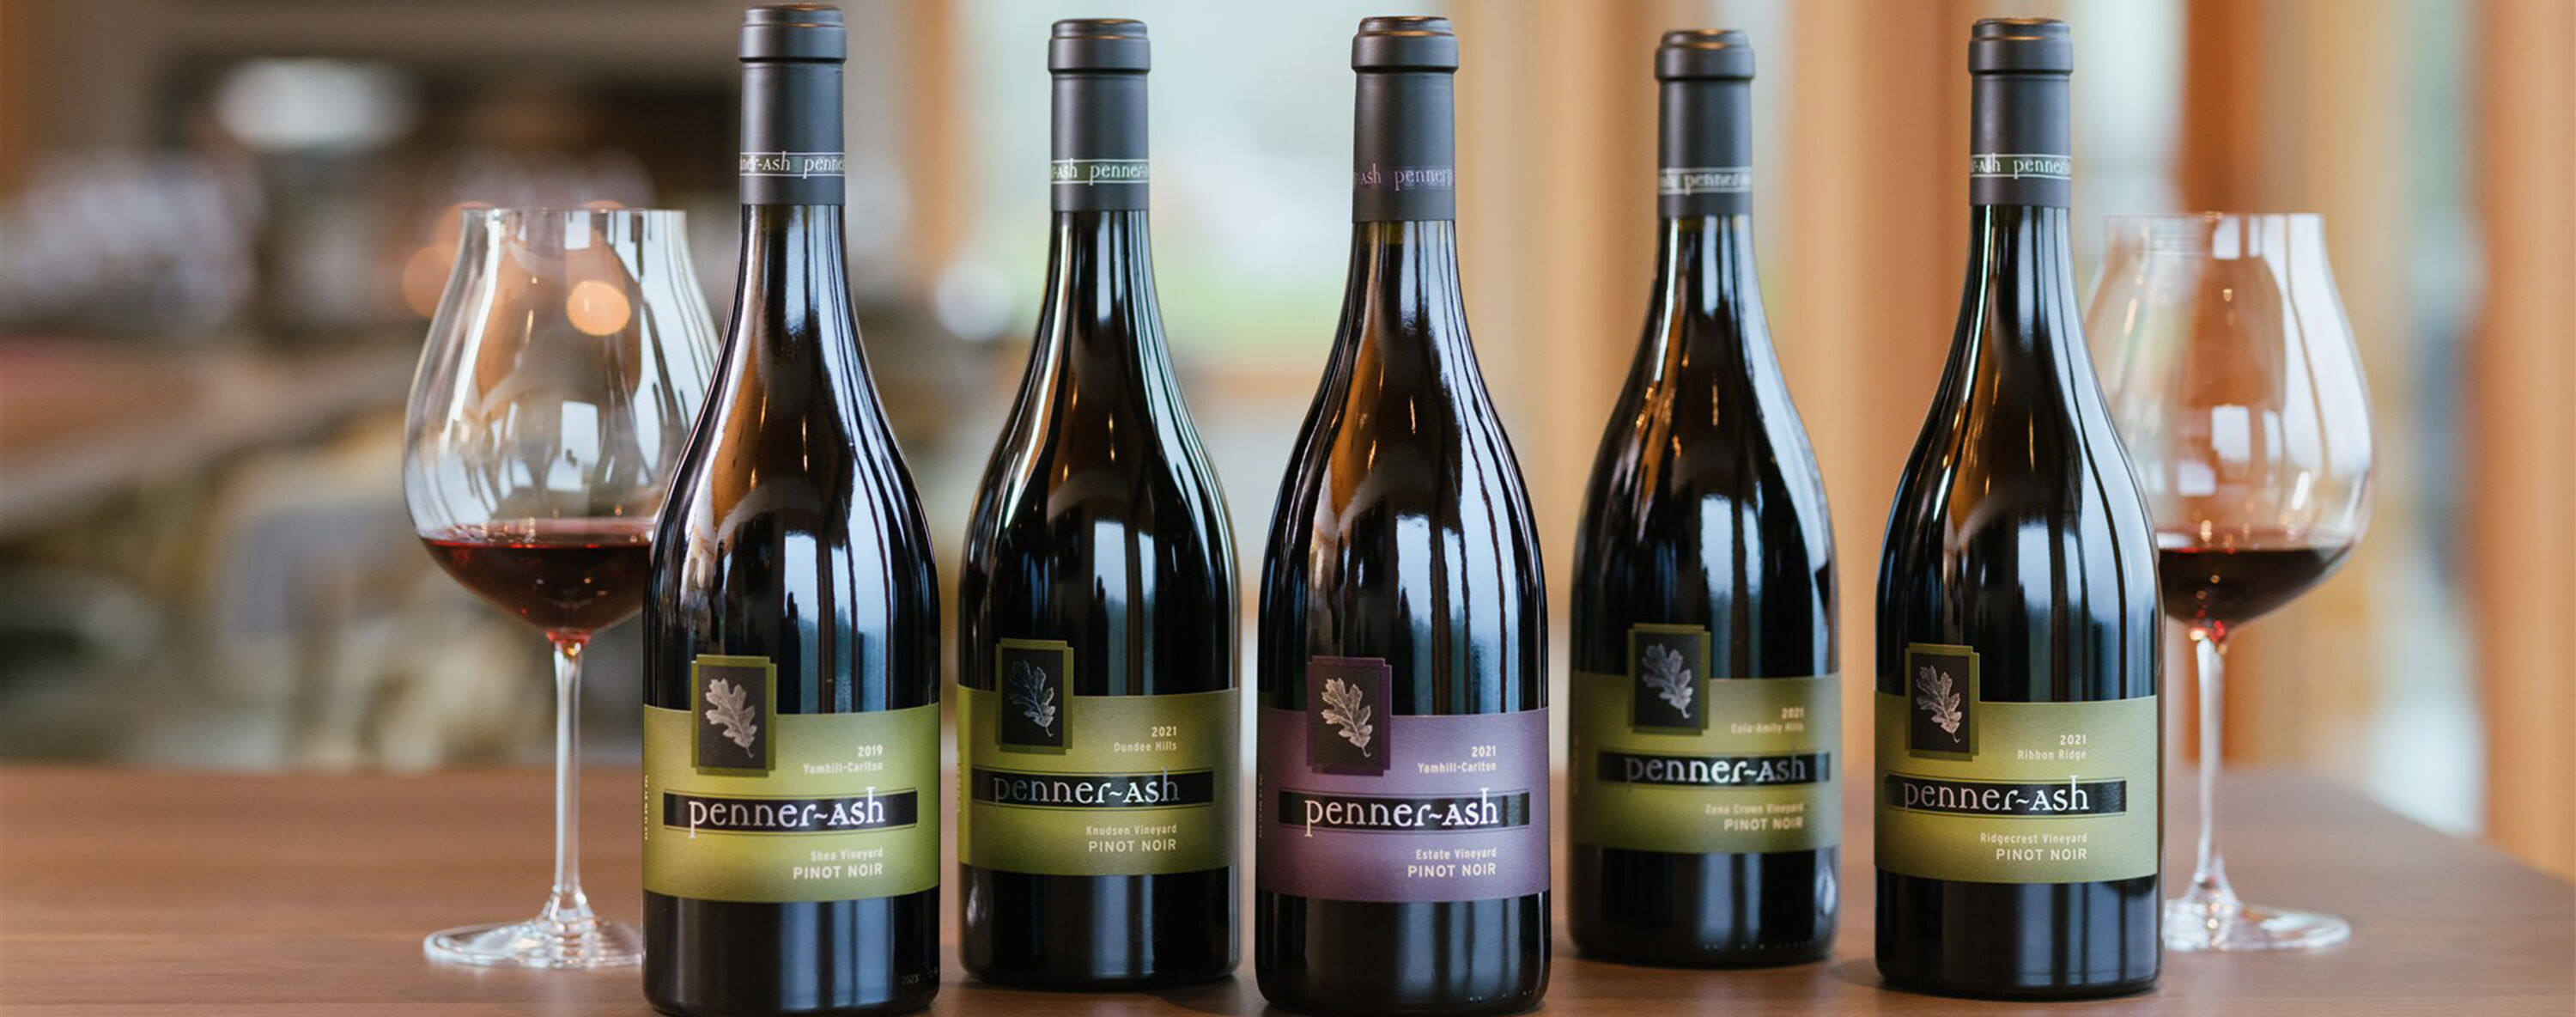 5 Penner-Ash Single Vineyard Pinot Noirs on a table between two glasses of red wine.